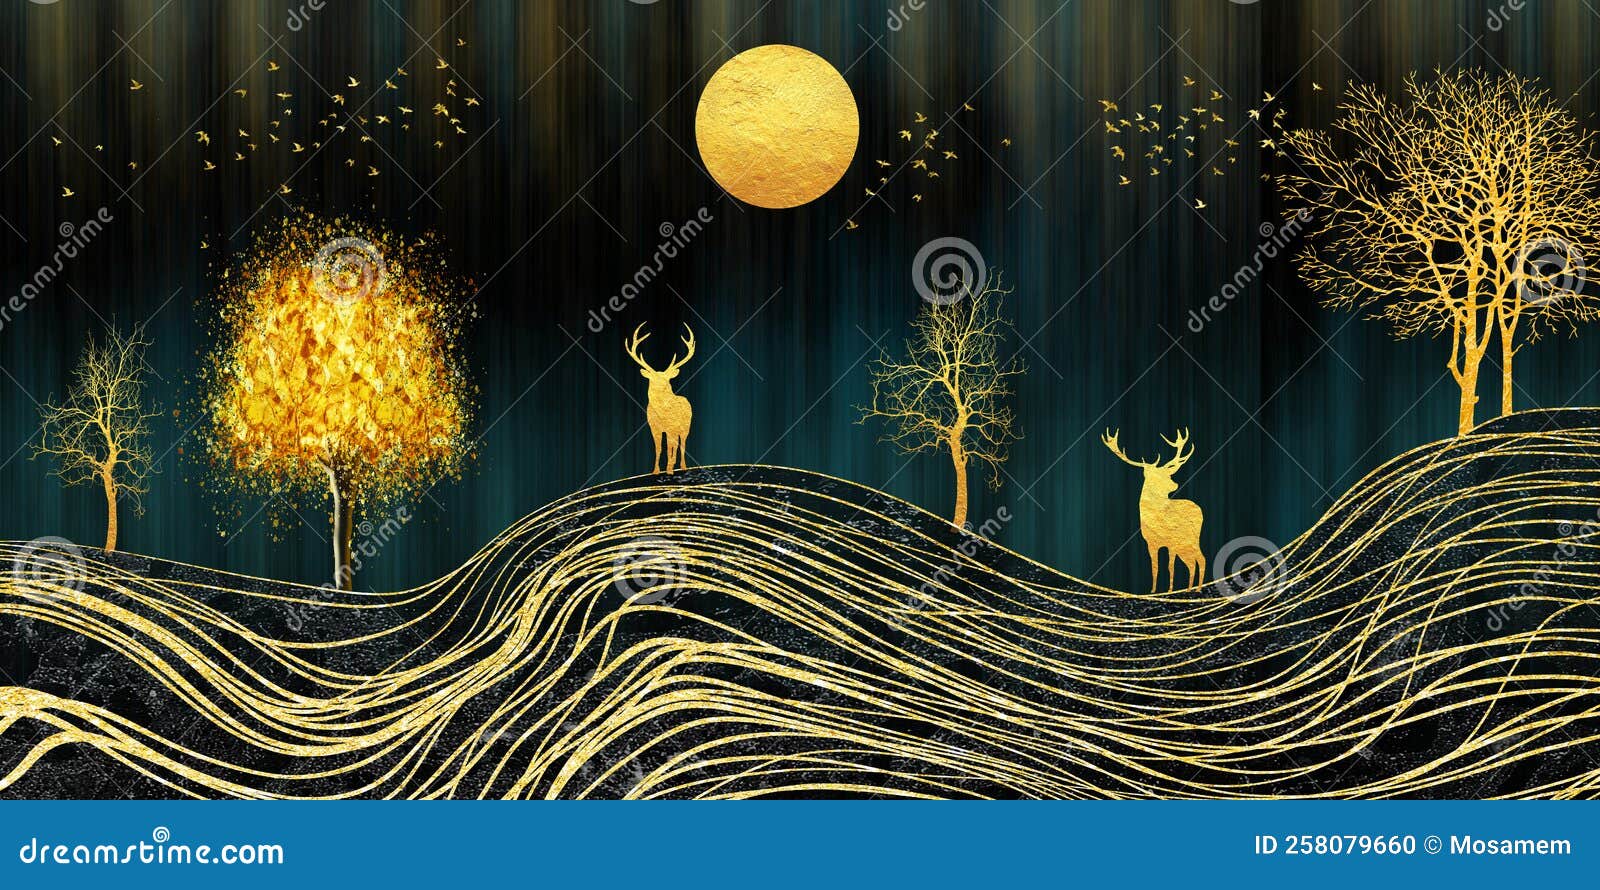 3d Modern Art Mural Wallpaper, Night Landscape with a Dark Black Background  with Stars and Moon, Golden Trees, Deers, and Gold Wav Stock Illustration -  Illustration of interior, floral: 258079660